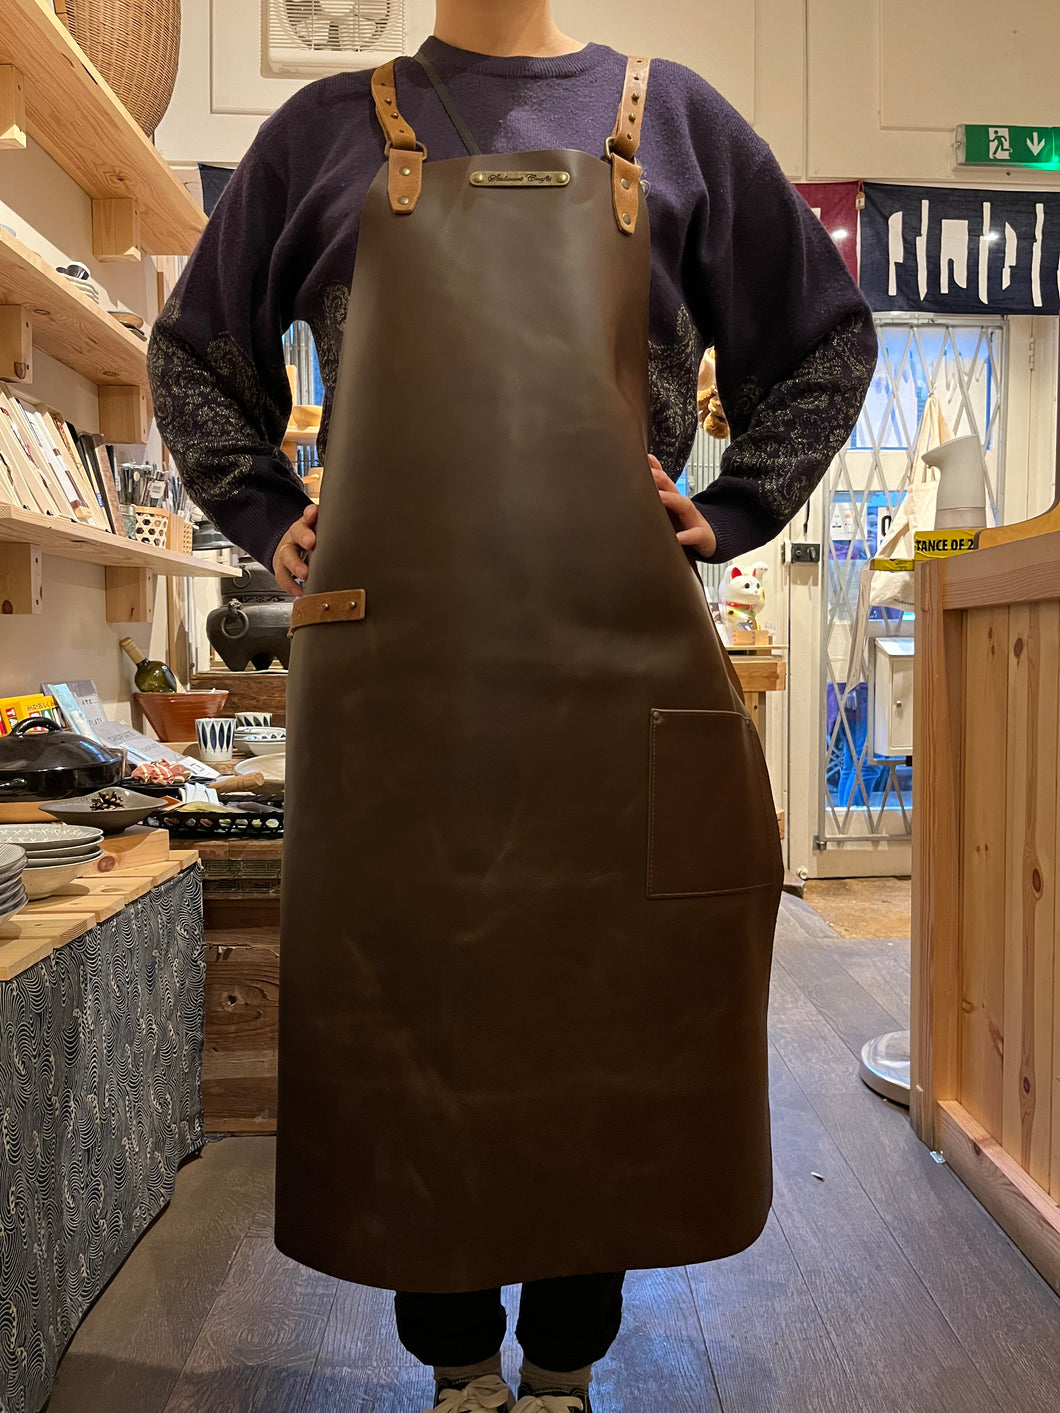 STALWART CRAFTS  CROSS STRAP LEATHER APRON BROWN